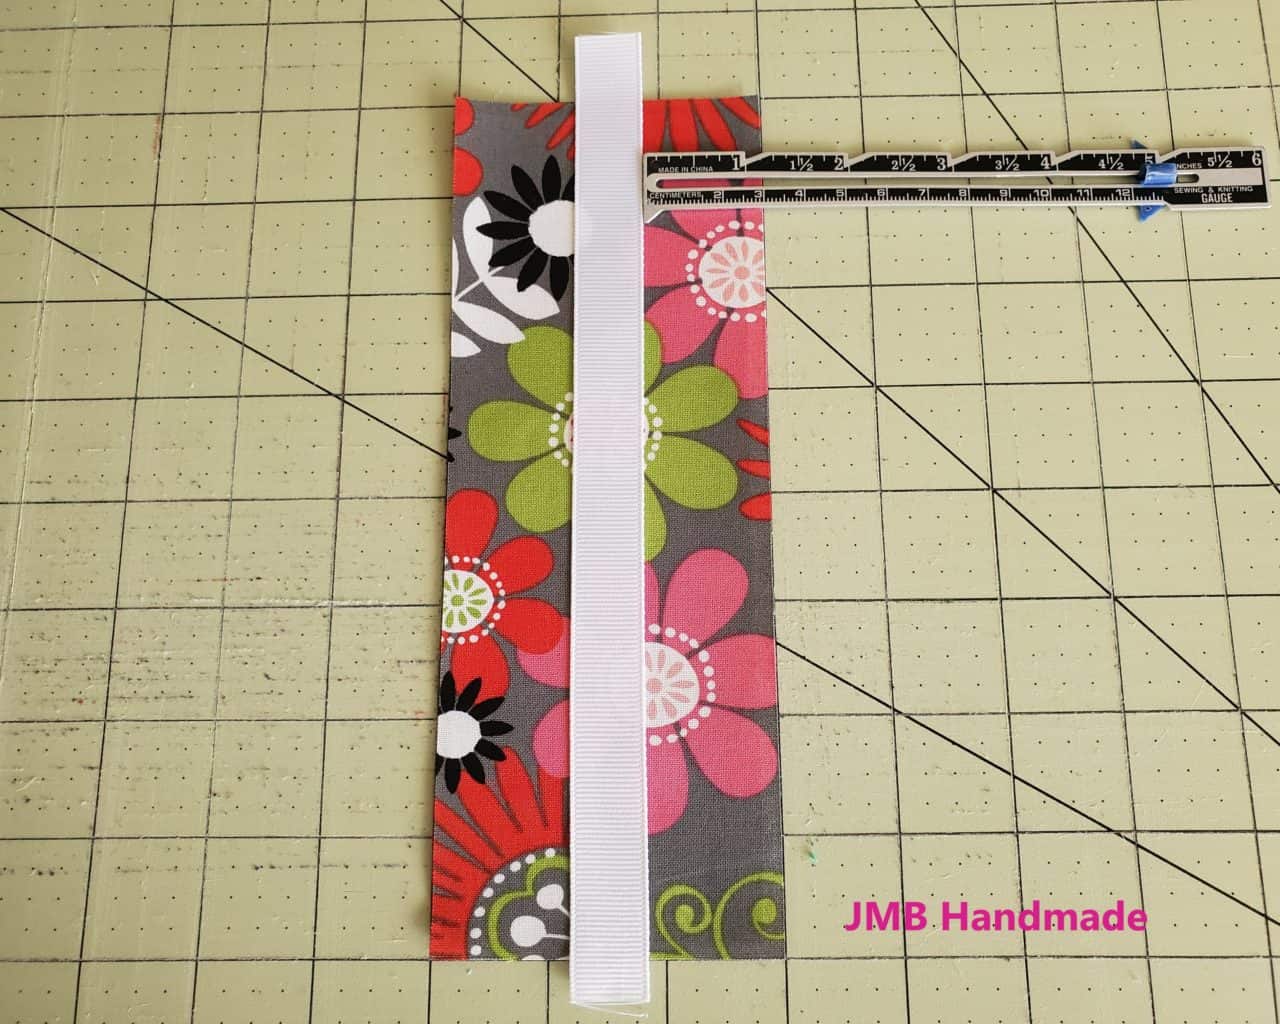 8 Sewing Studio Supplies to Add to Your Collection - JMB Handmade